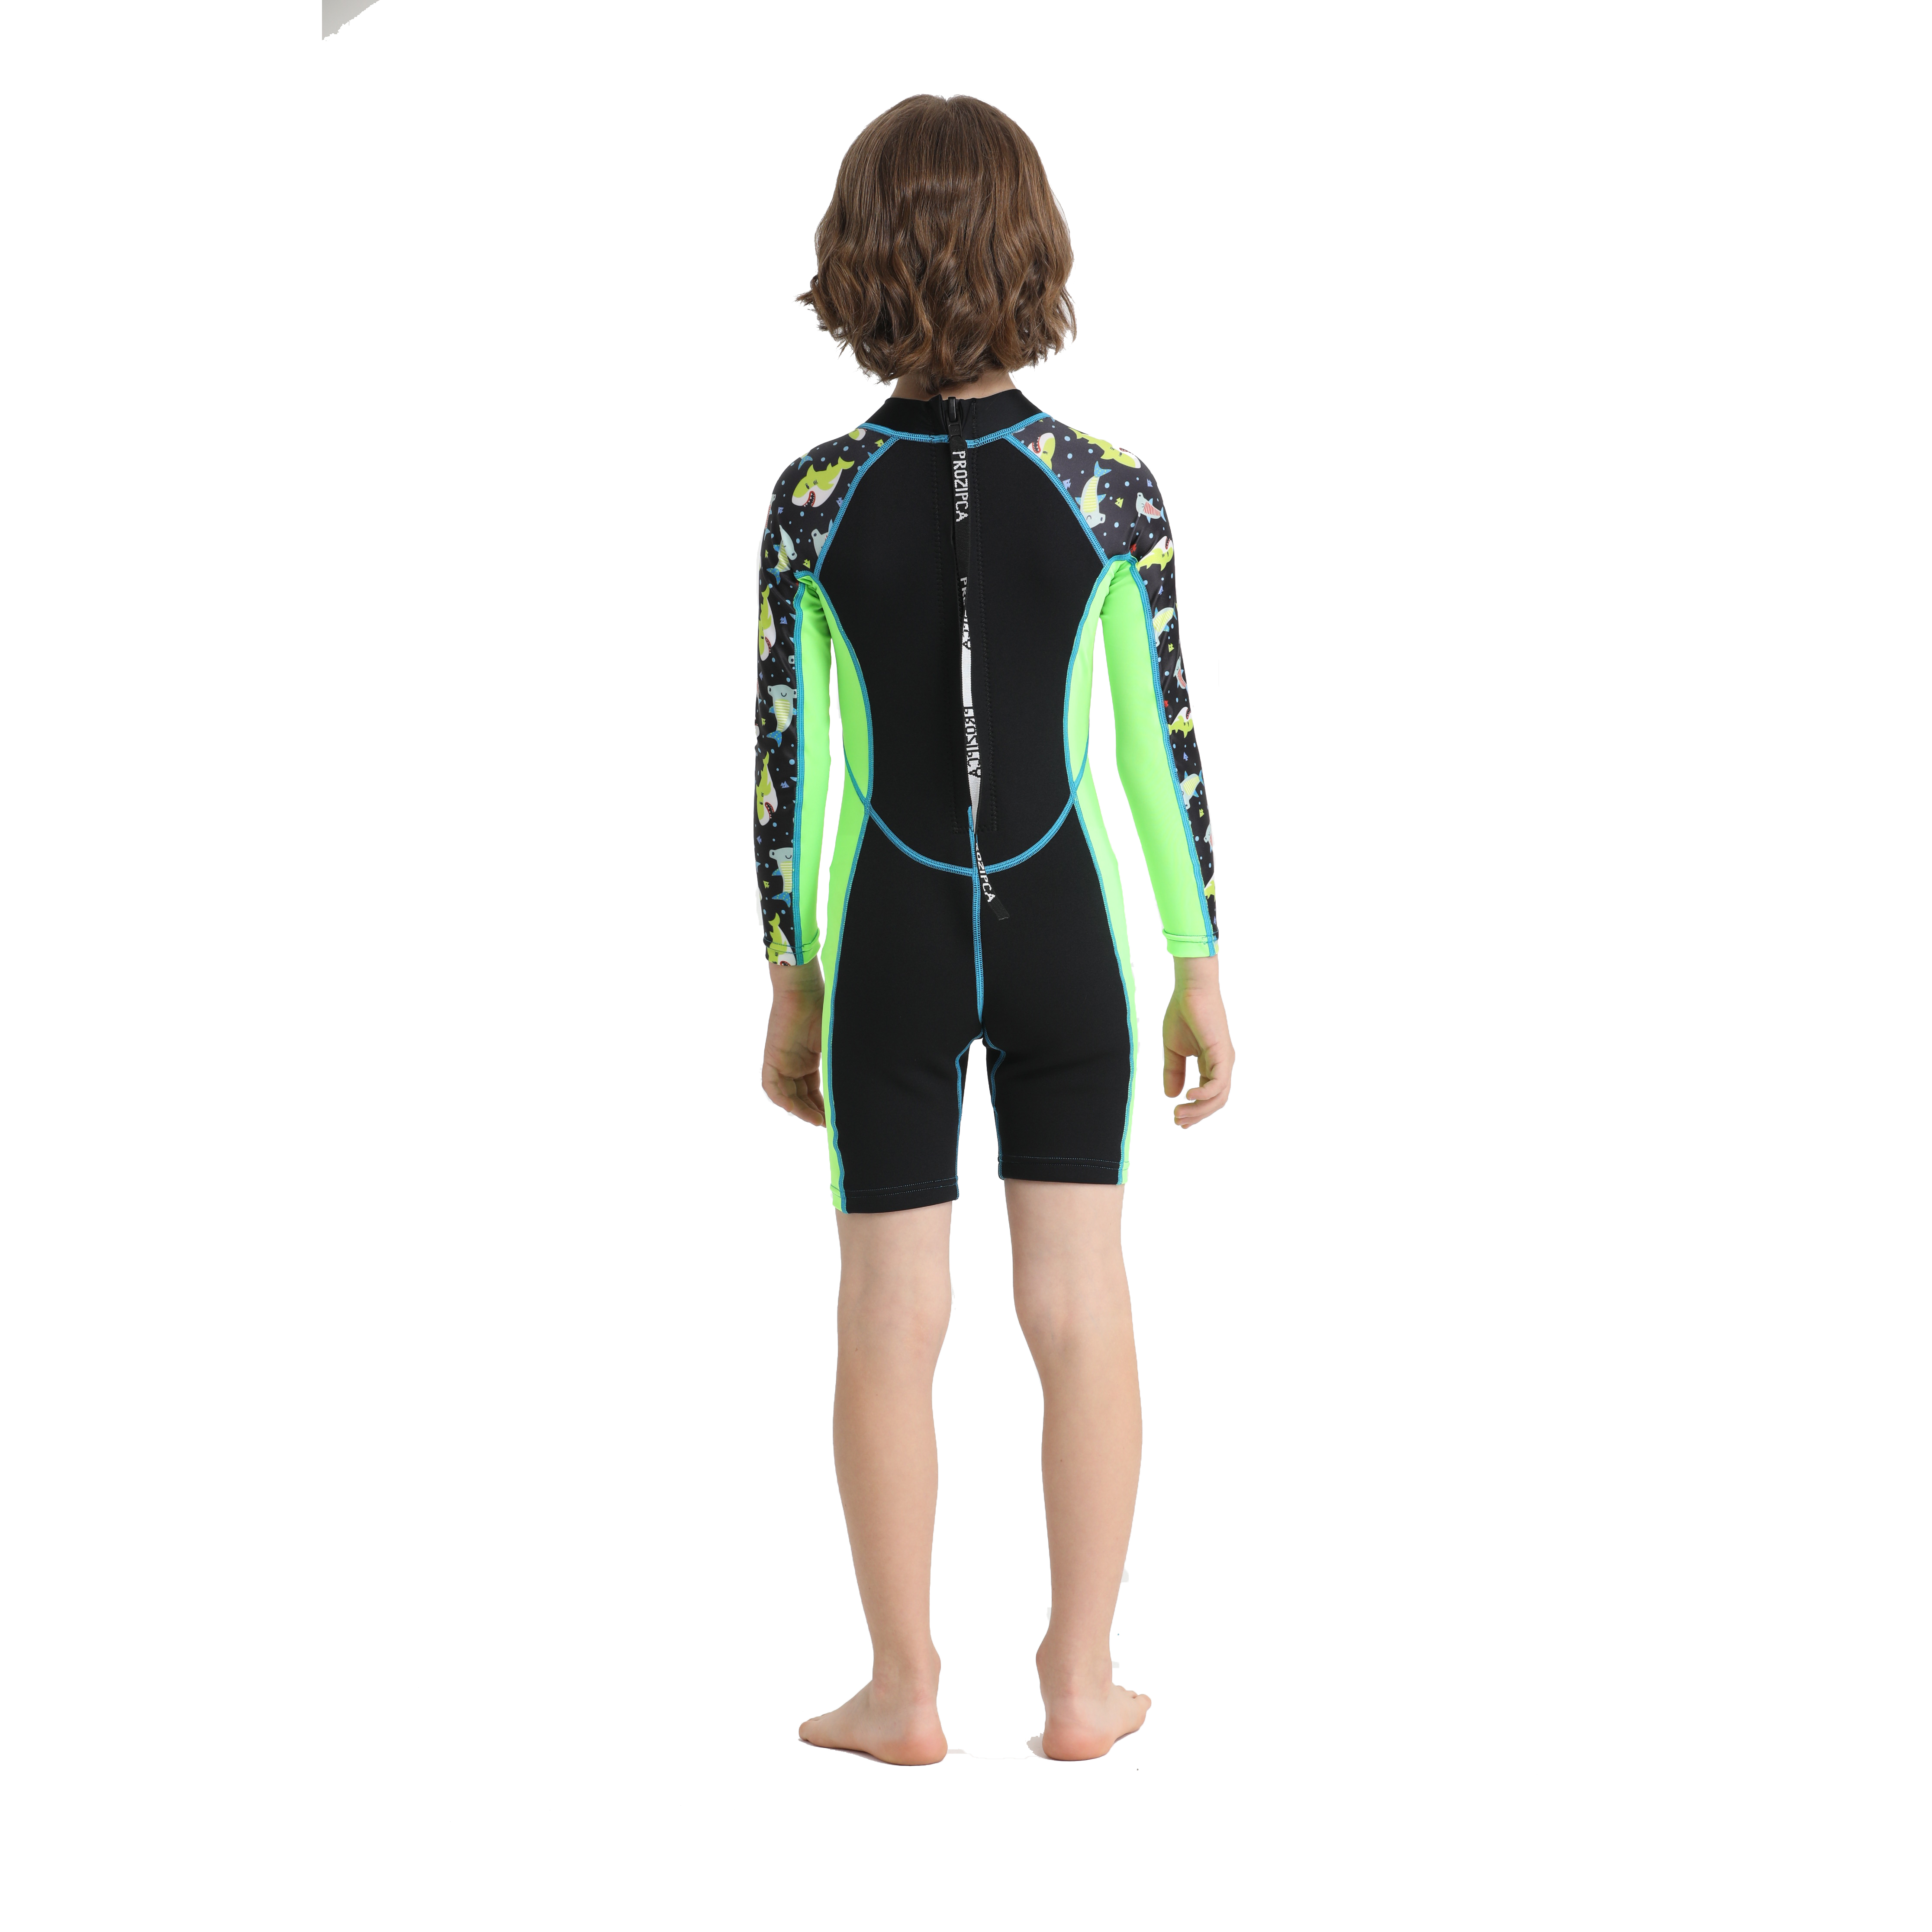 Customized Water Sports Beach Swimsuits Children Wetsuits Shorty Boys Neoprene Kids Surfing Snorkeling Wet Suit